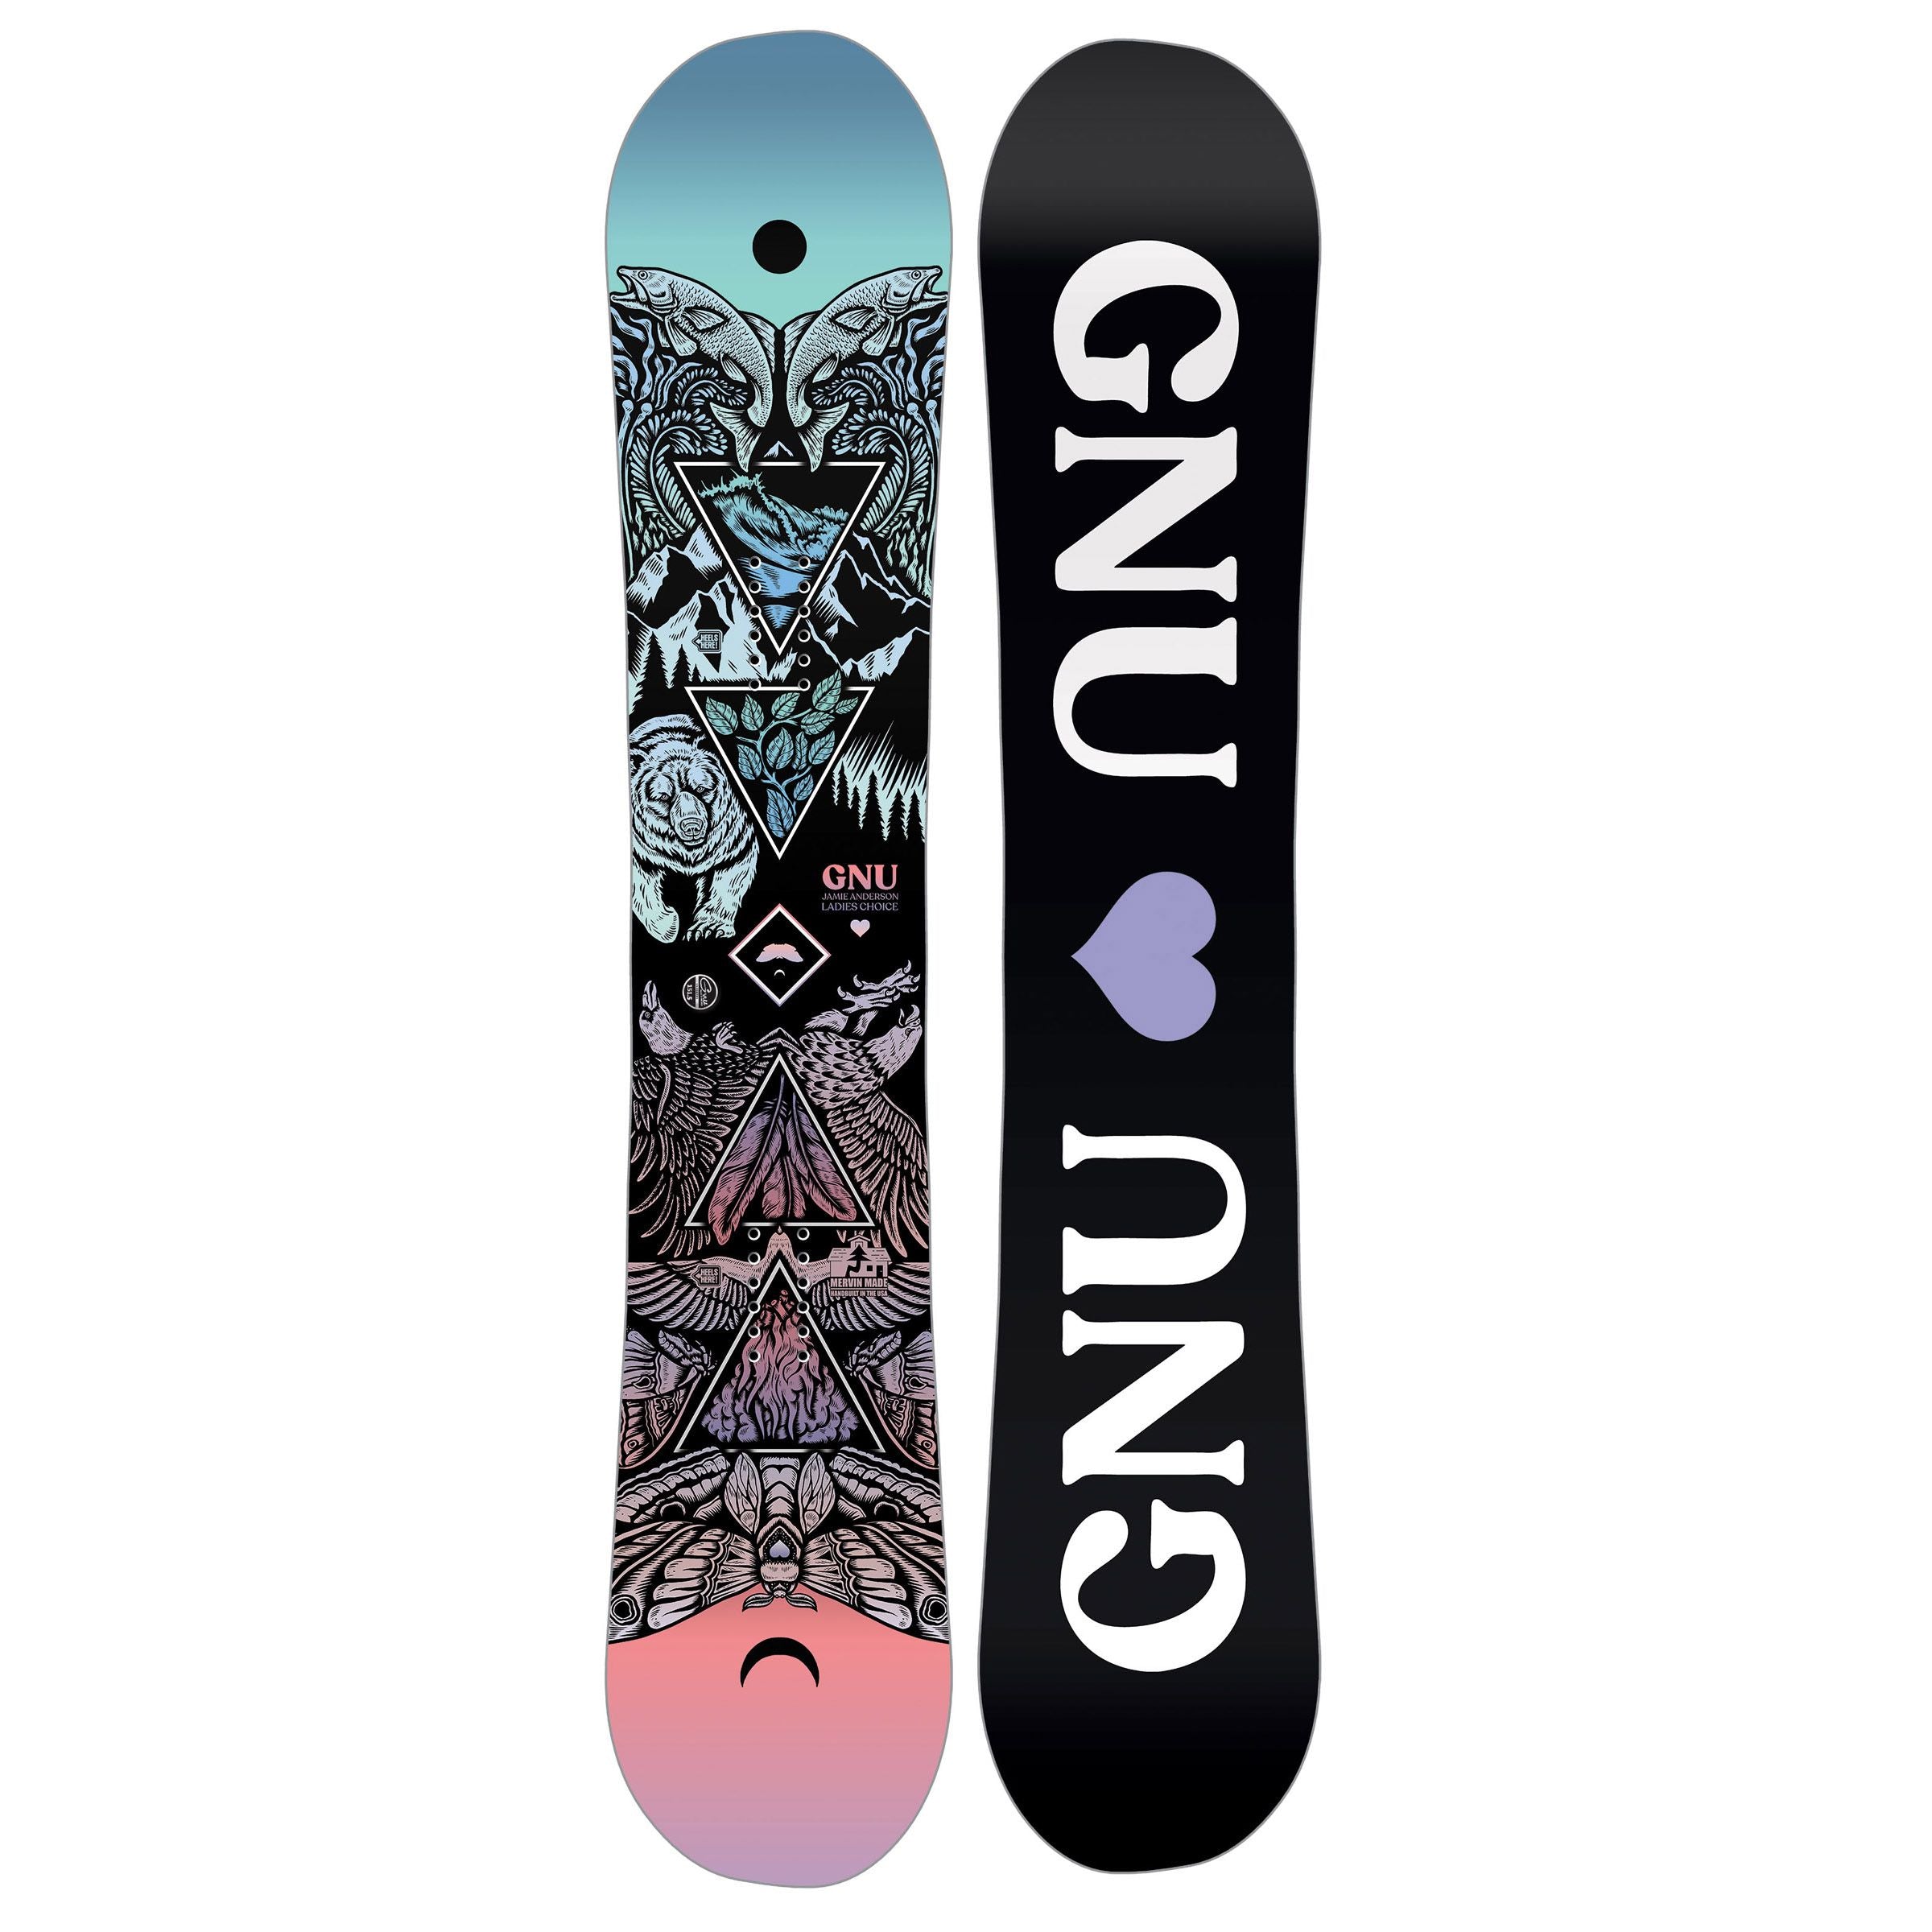 Snowboards – Mud Sweat and Gears